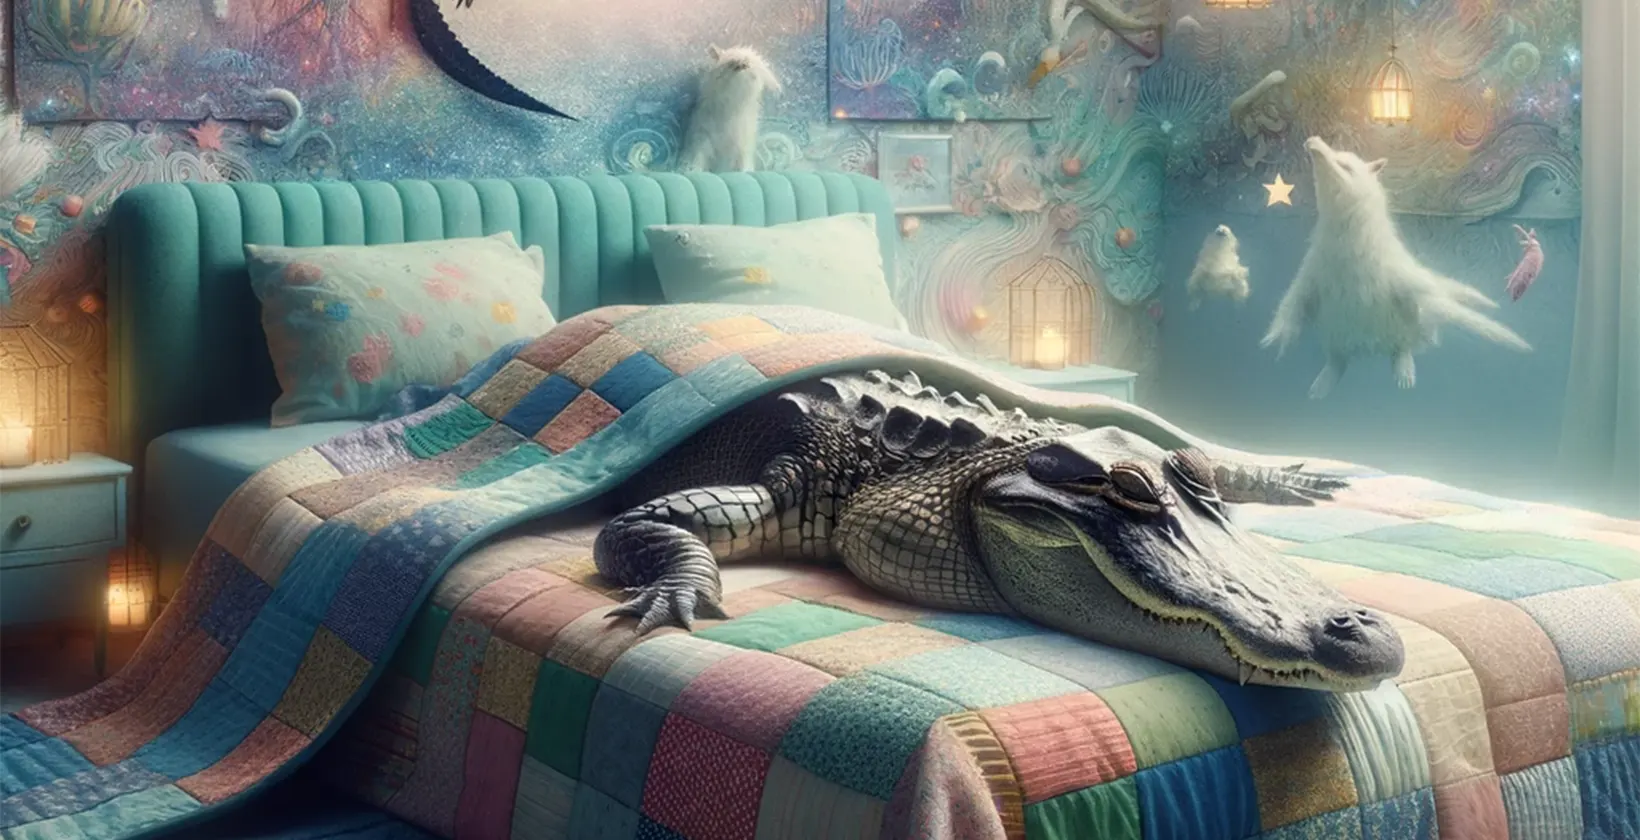 Dreaming of Alligator in Bed